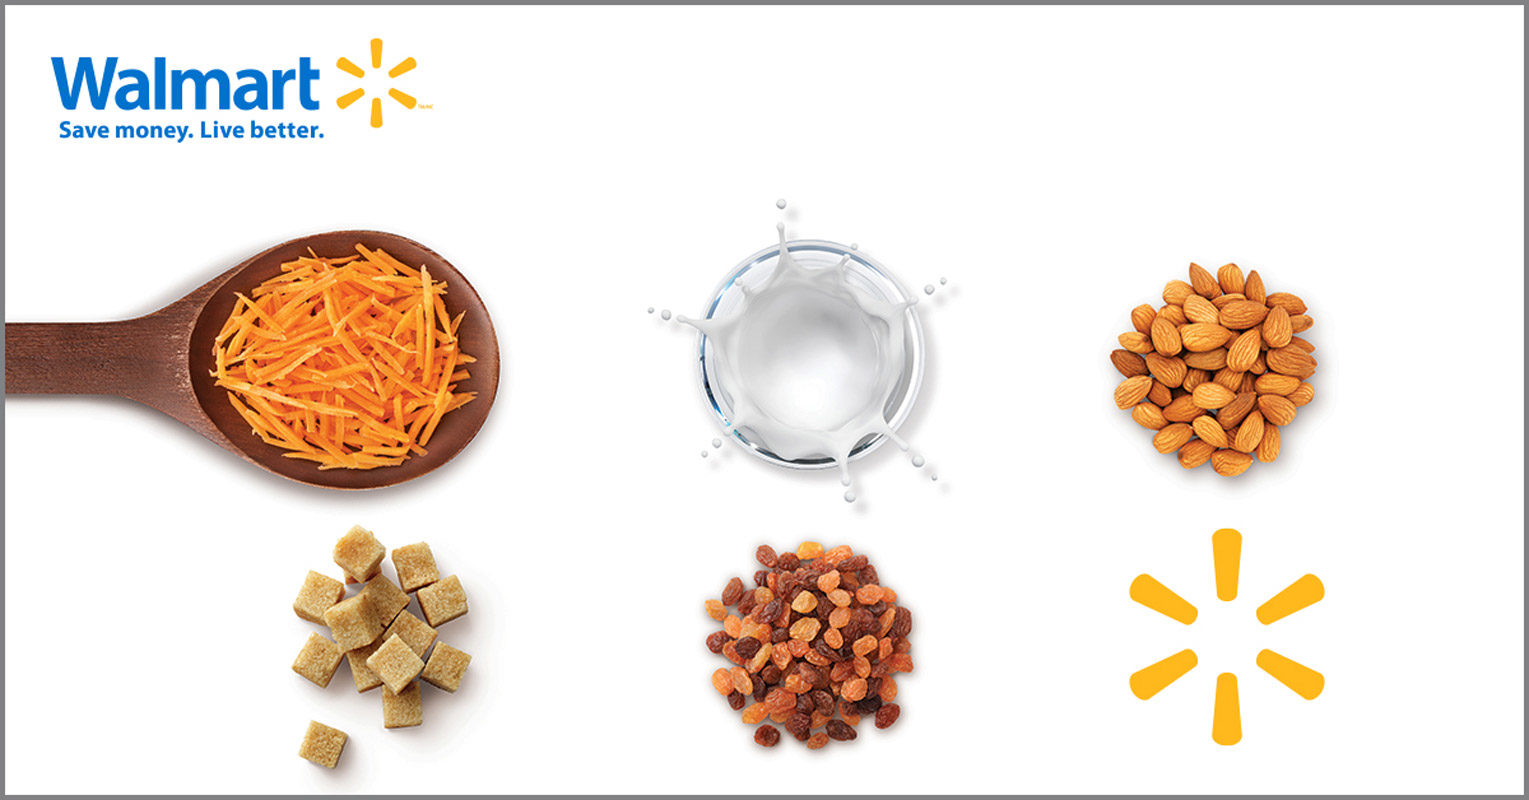 Vaisakhi_Facebook_sweet is an ad for Walmart that shows all the ingredients for carrot halwa.